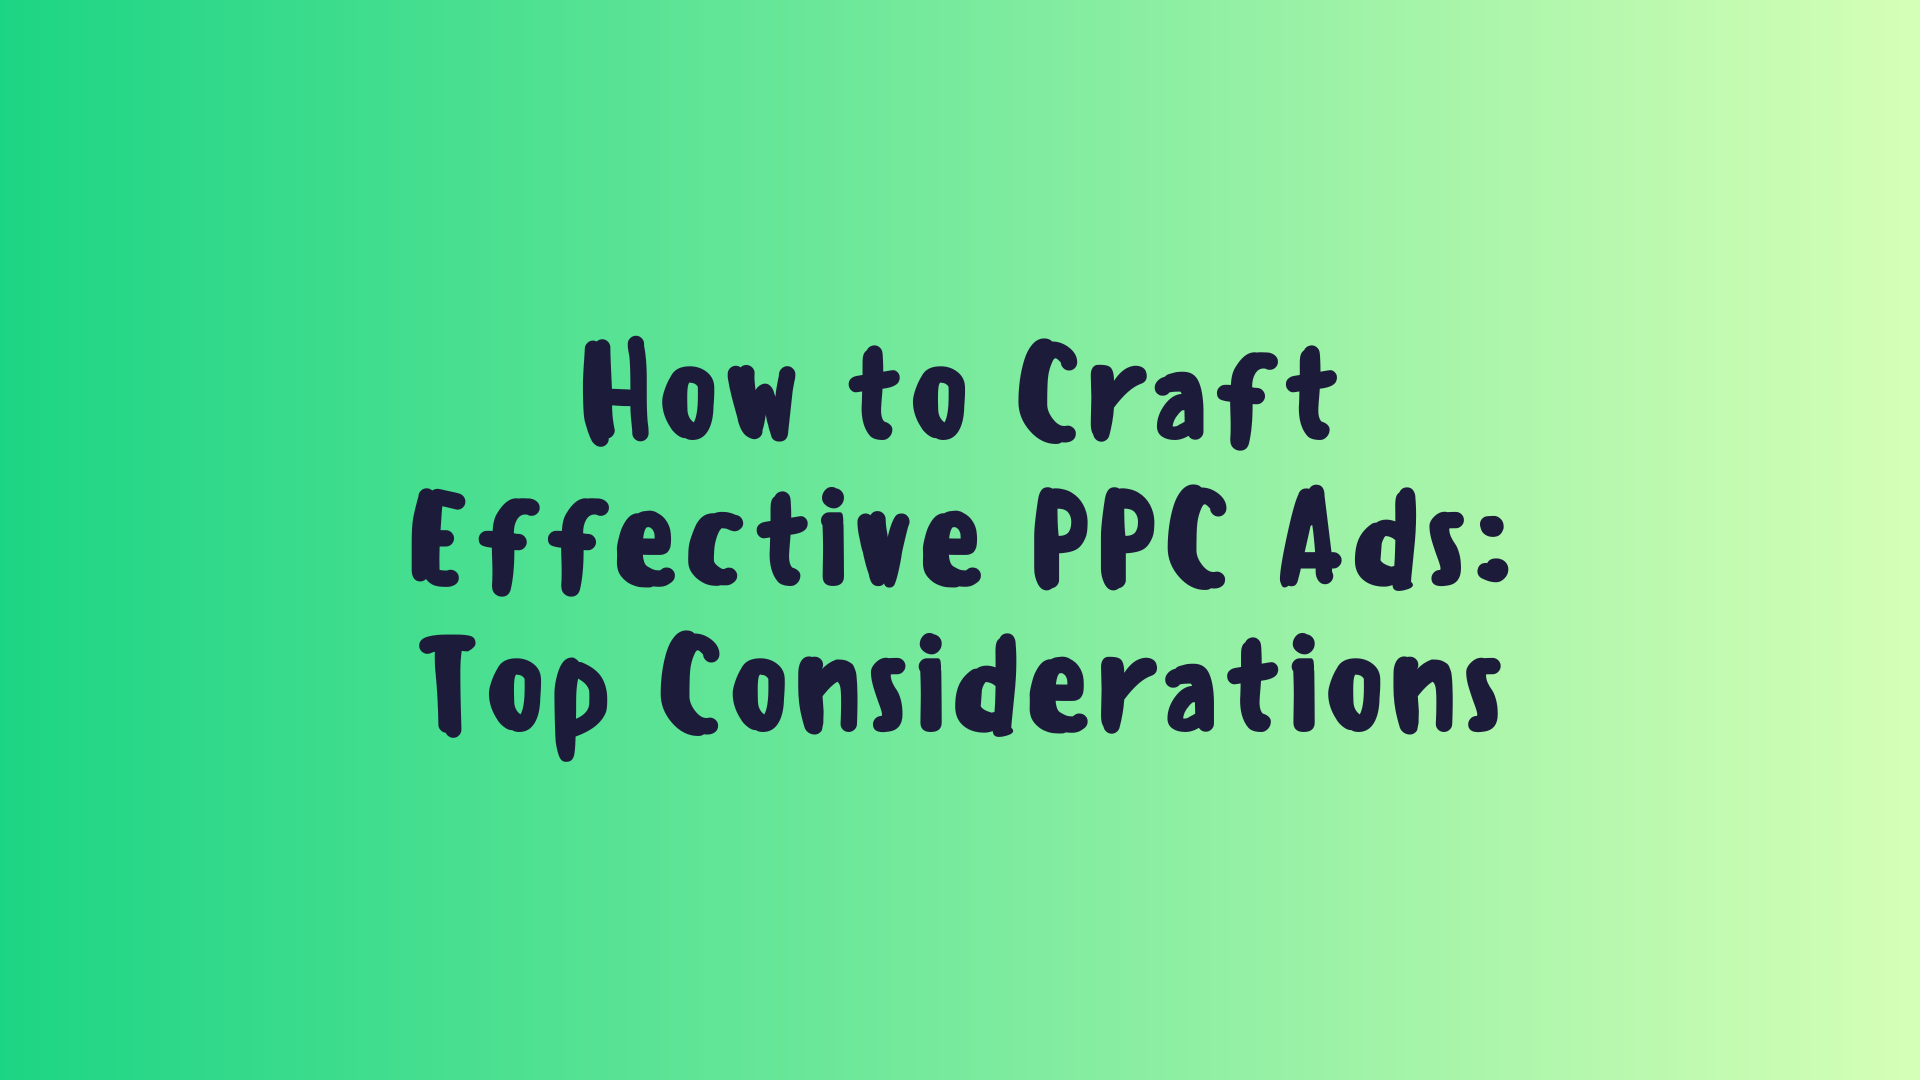 How to Craft Effective PPC Ads: Top Considerations